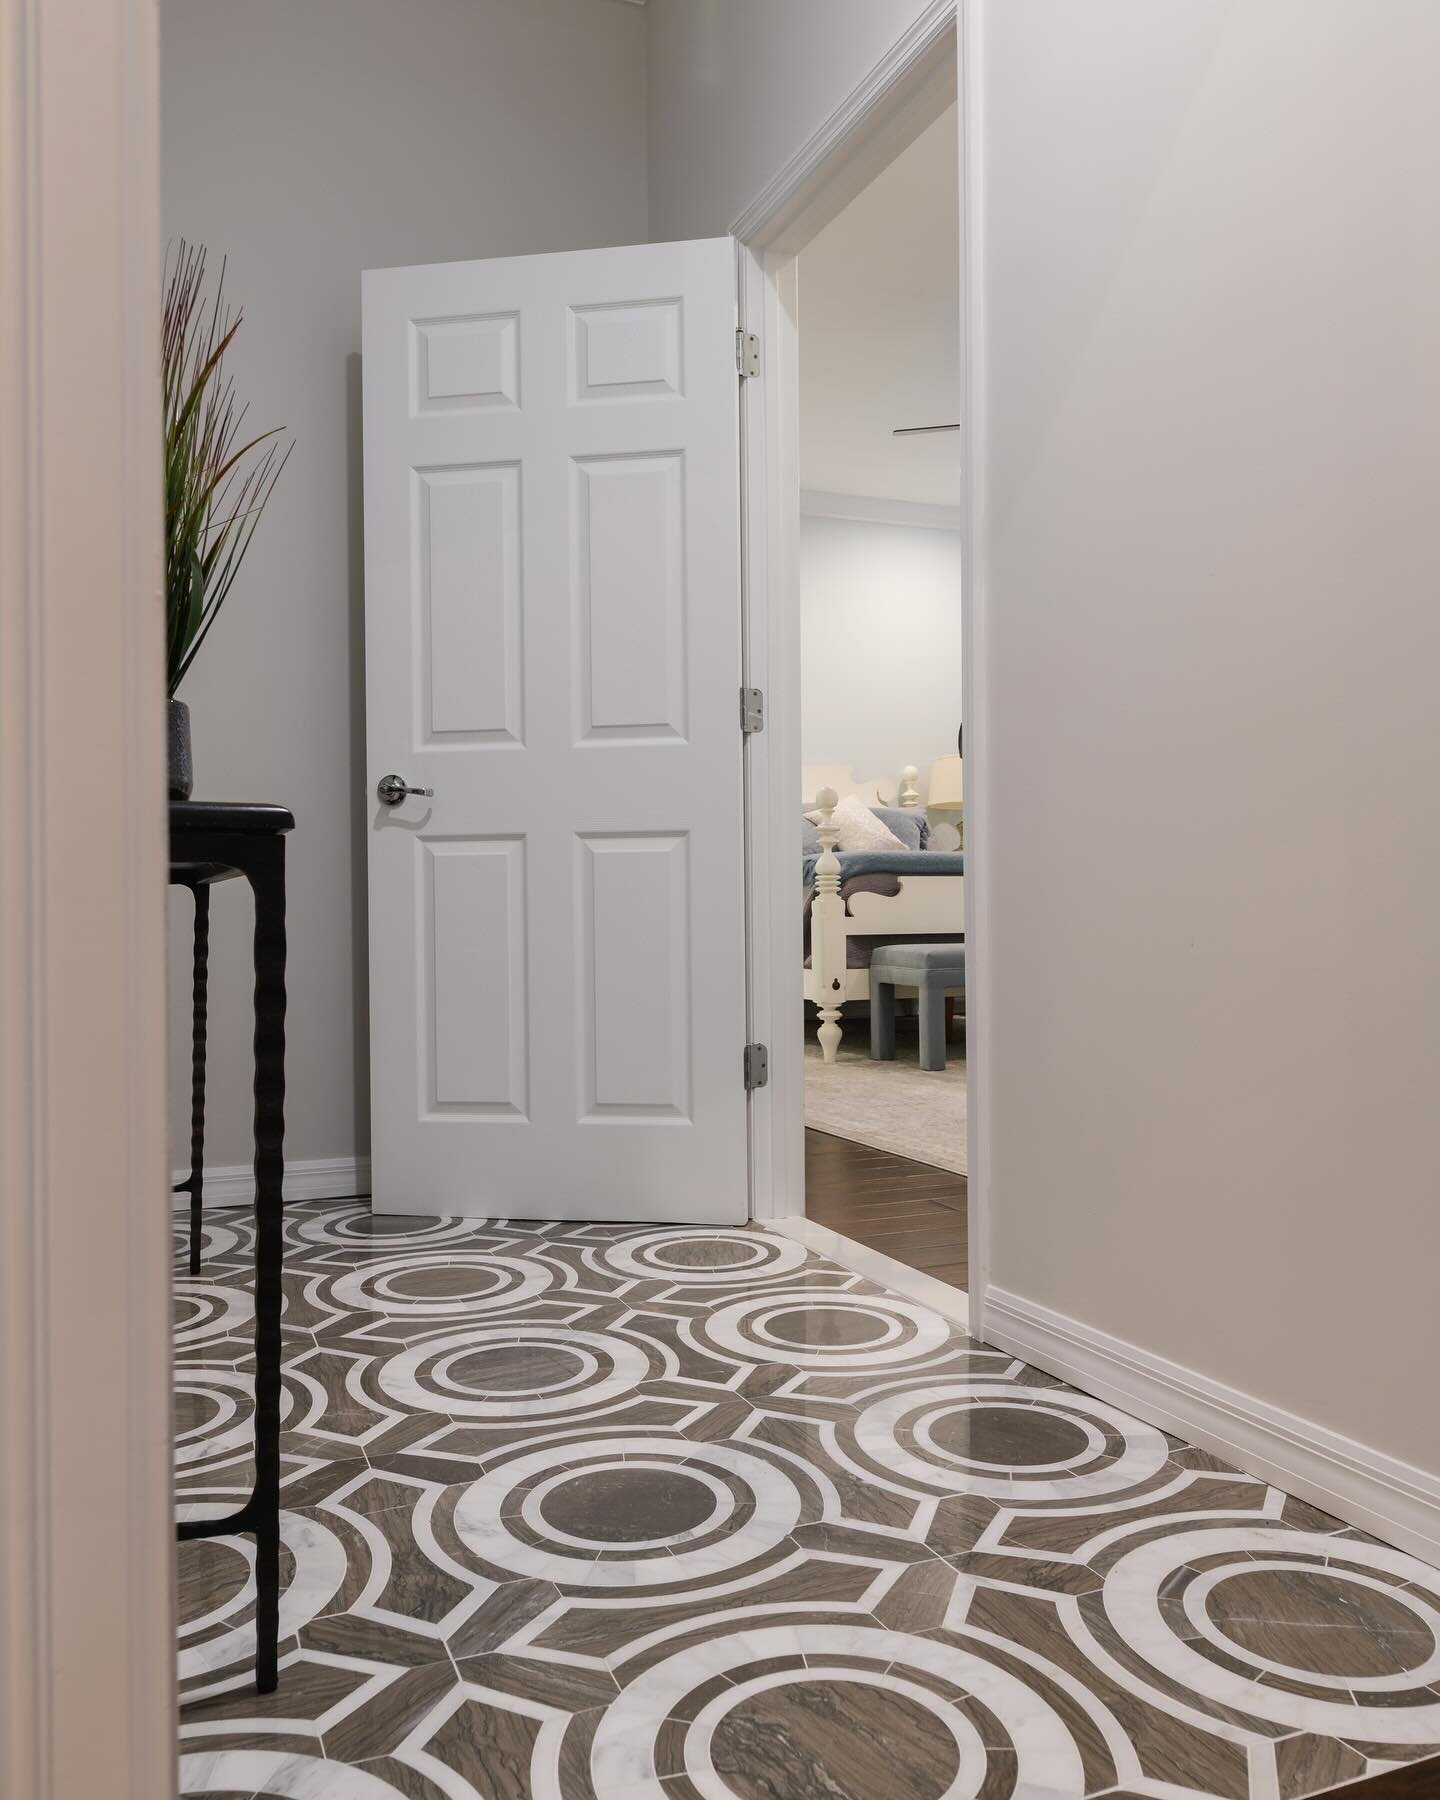 Step into luxury with this main bedroom hall featuring a mesmerizing waterjet floor tile design!  The intricate pattern of the tiles create a gorgeous focal point that elevates the entire space. Truly a statement of elegance with these stunning tiles